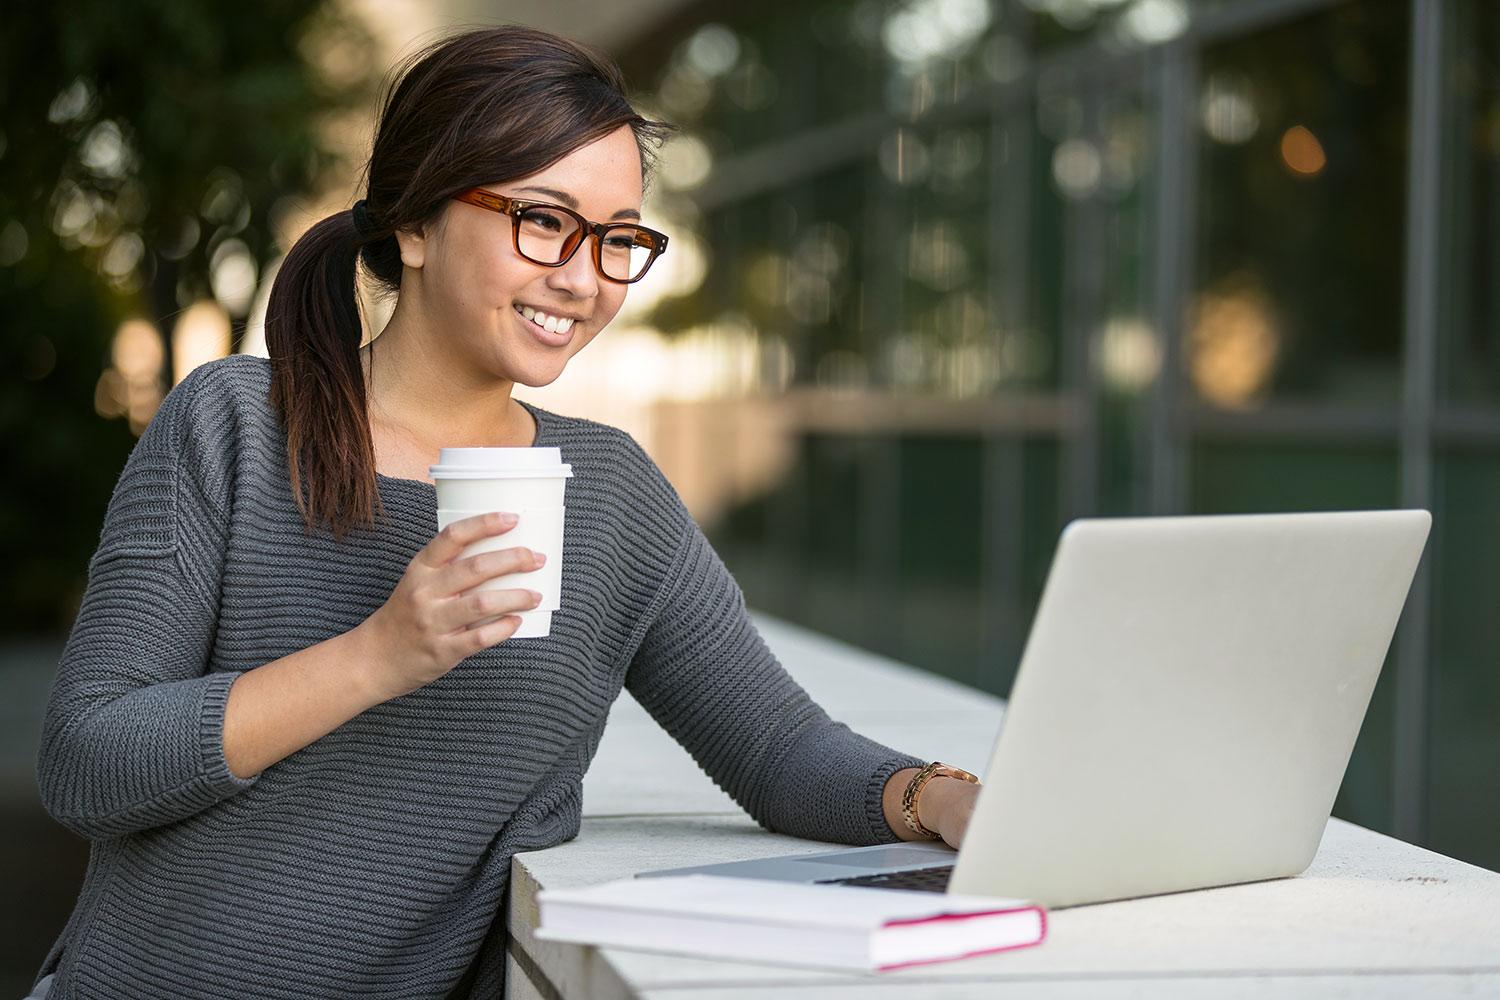 Lady outside on laptop with coffee